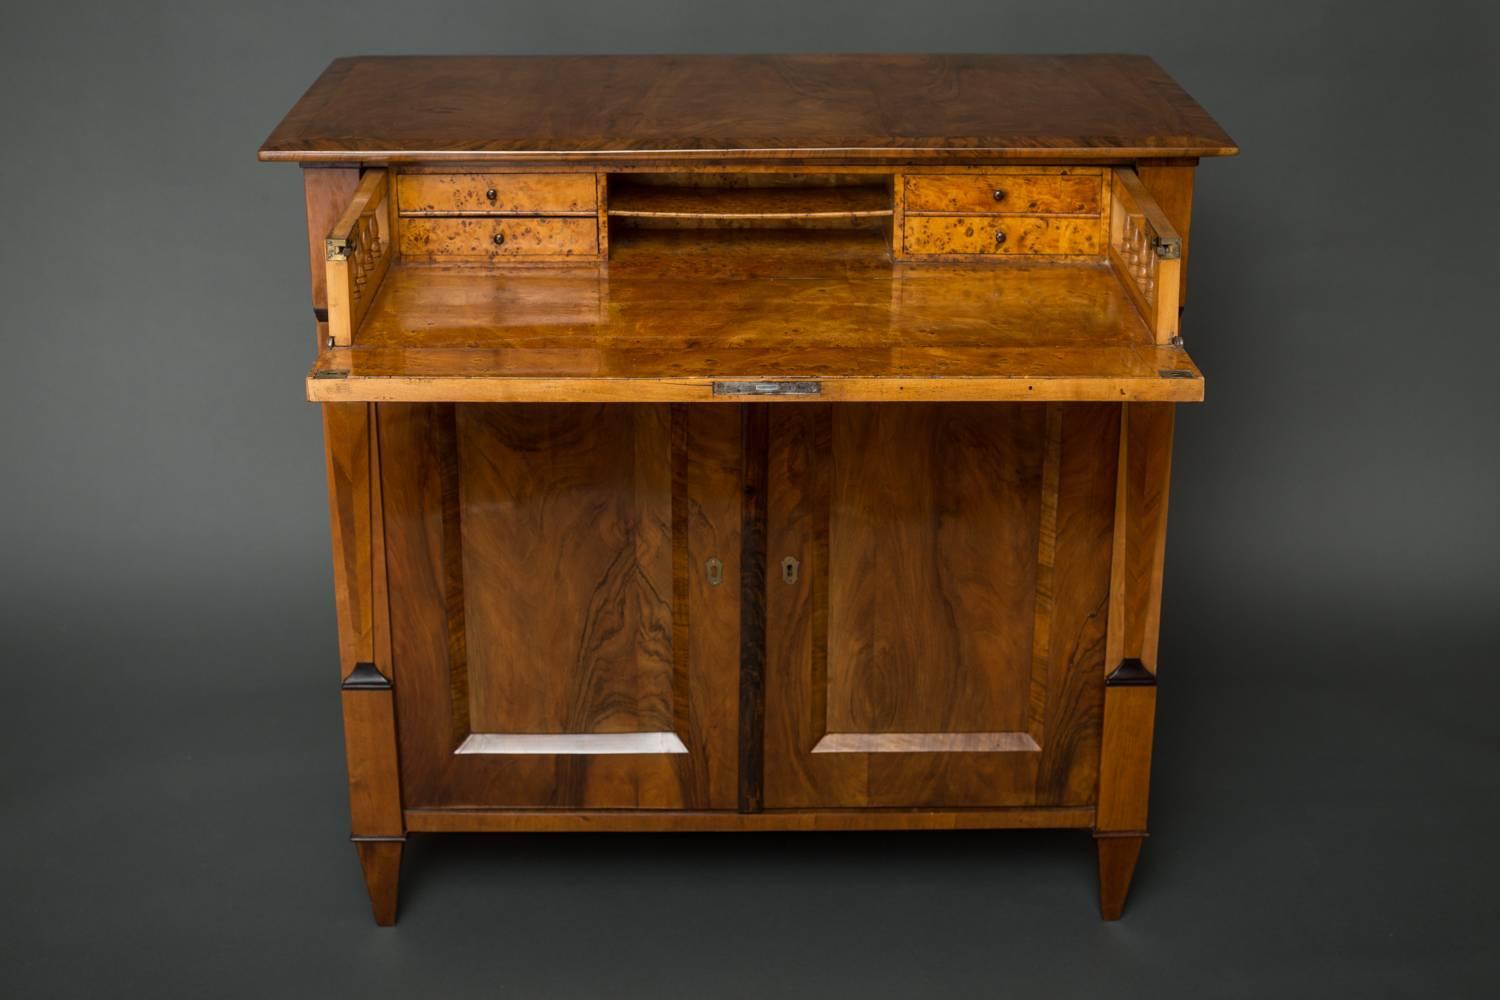 Biedermeier Walnut Secretary Chest, Biedermeier walnut secretary with cabinet below.  Desk has four small drawers and a letter shelf.  Cabinet comes with one interior shelf.  Lovely grain detail and contrasting colored accents.
